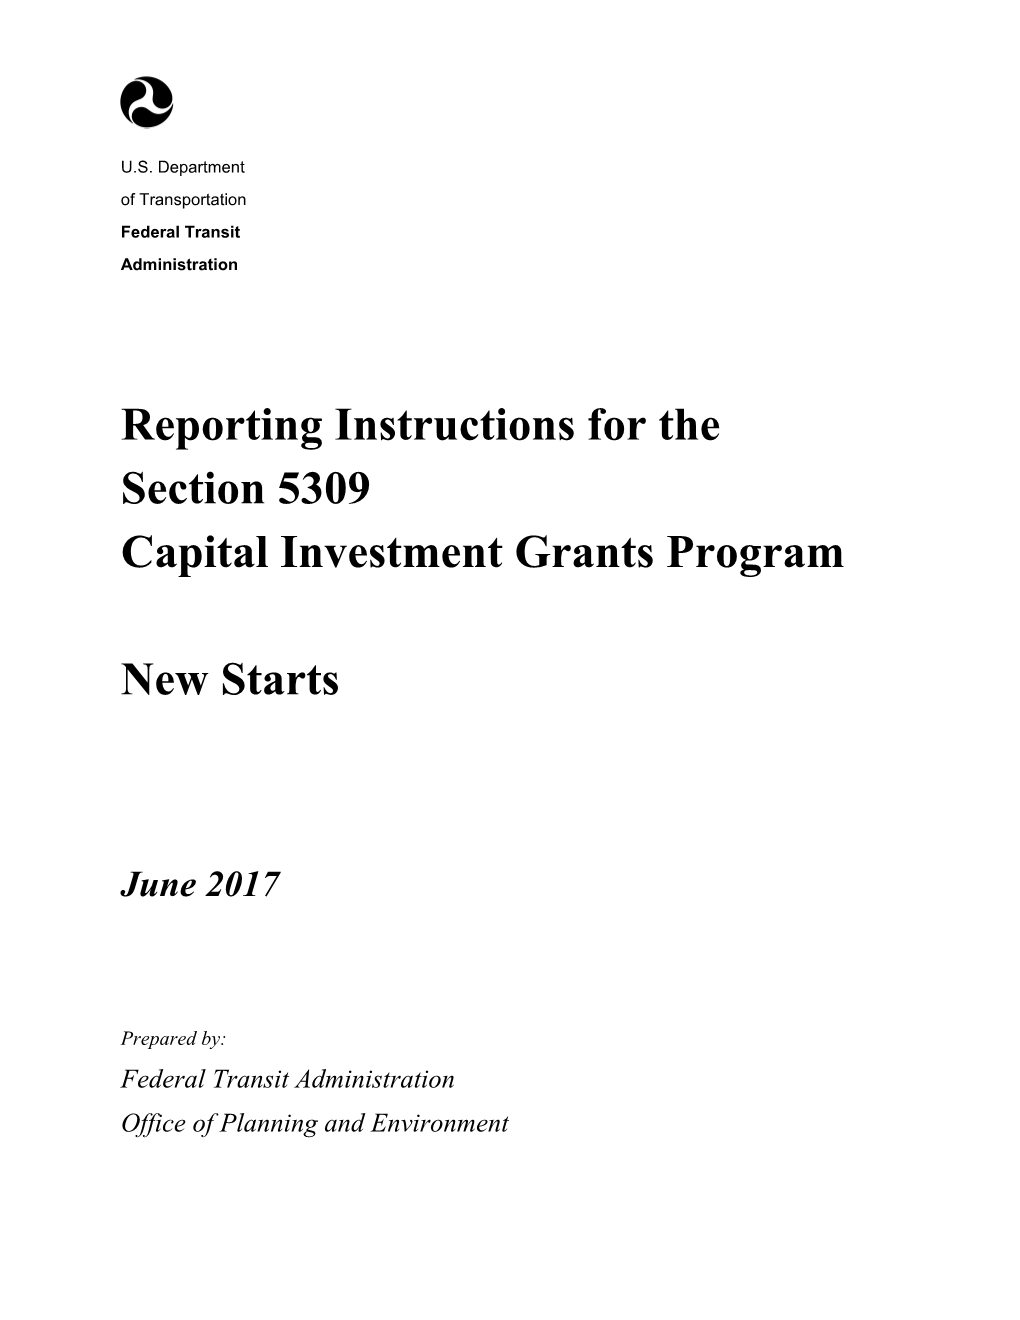 Reporting Instructions for the Section 5309 Capital Investment Grants Program New Starts